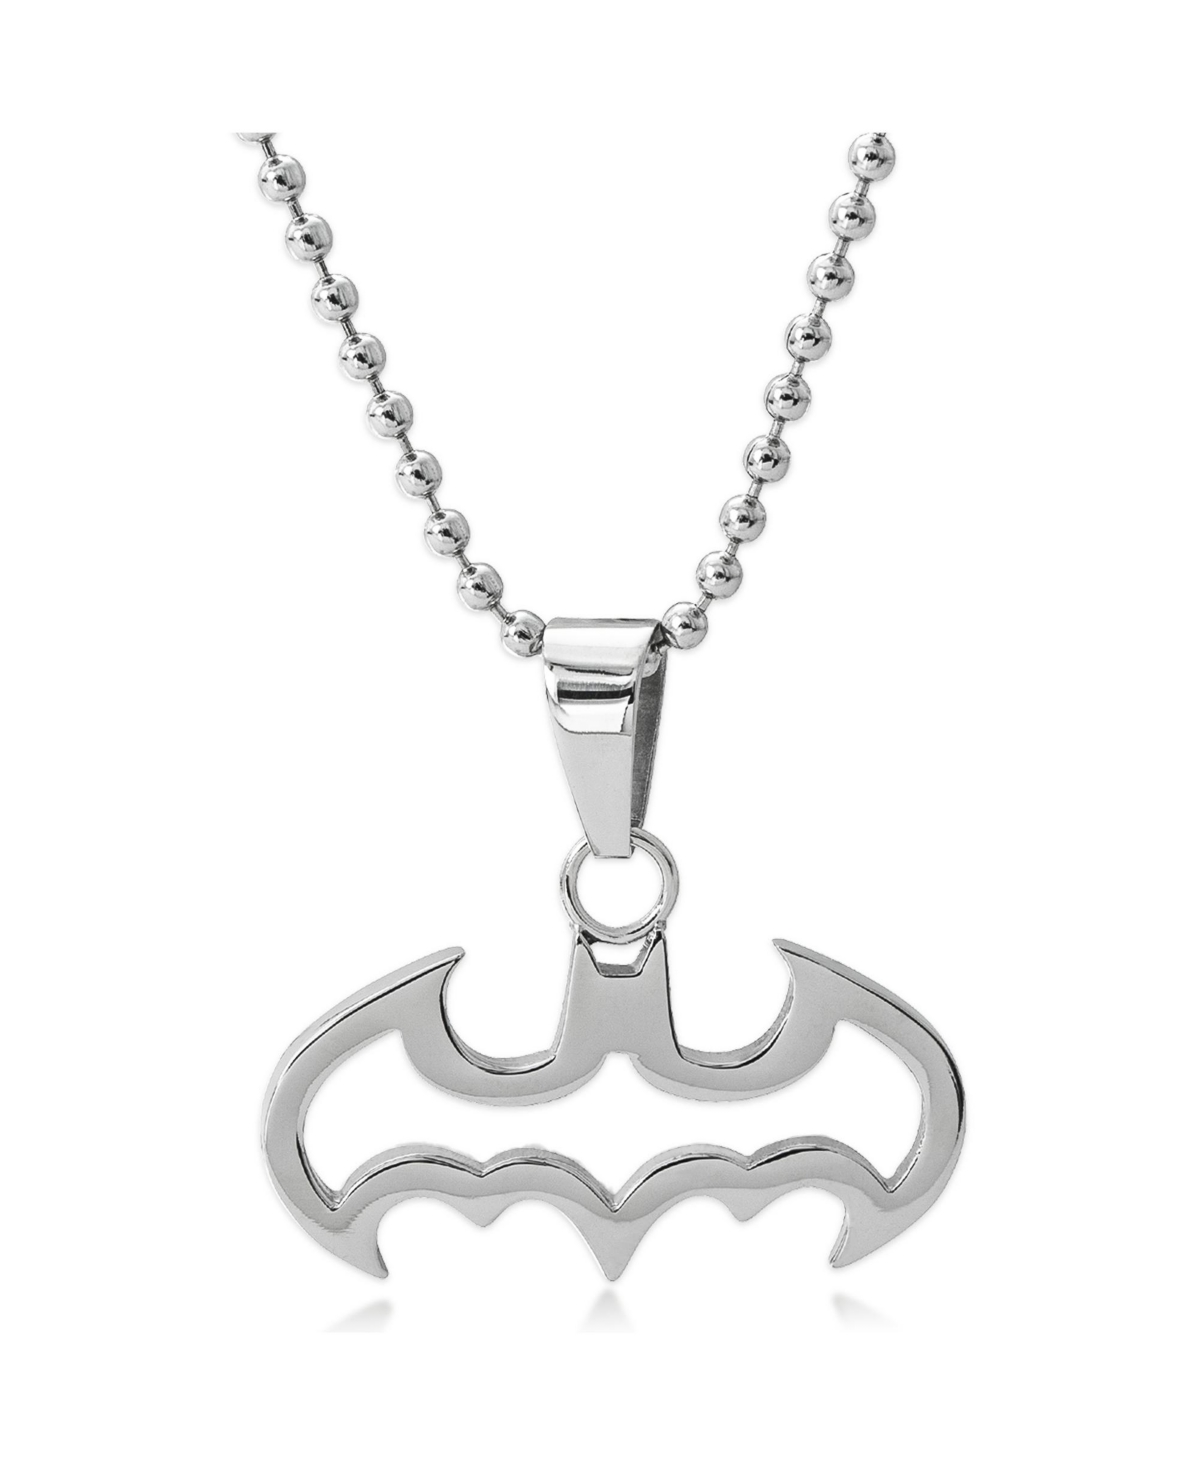 Batman Stainless Steel Cut Out Logo Pendant Necklace, 16" Ball Chain - Silver tone